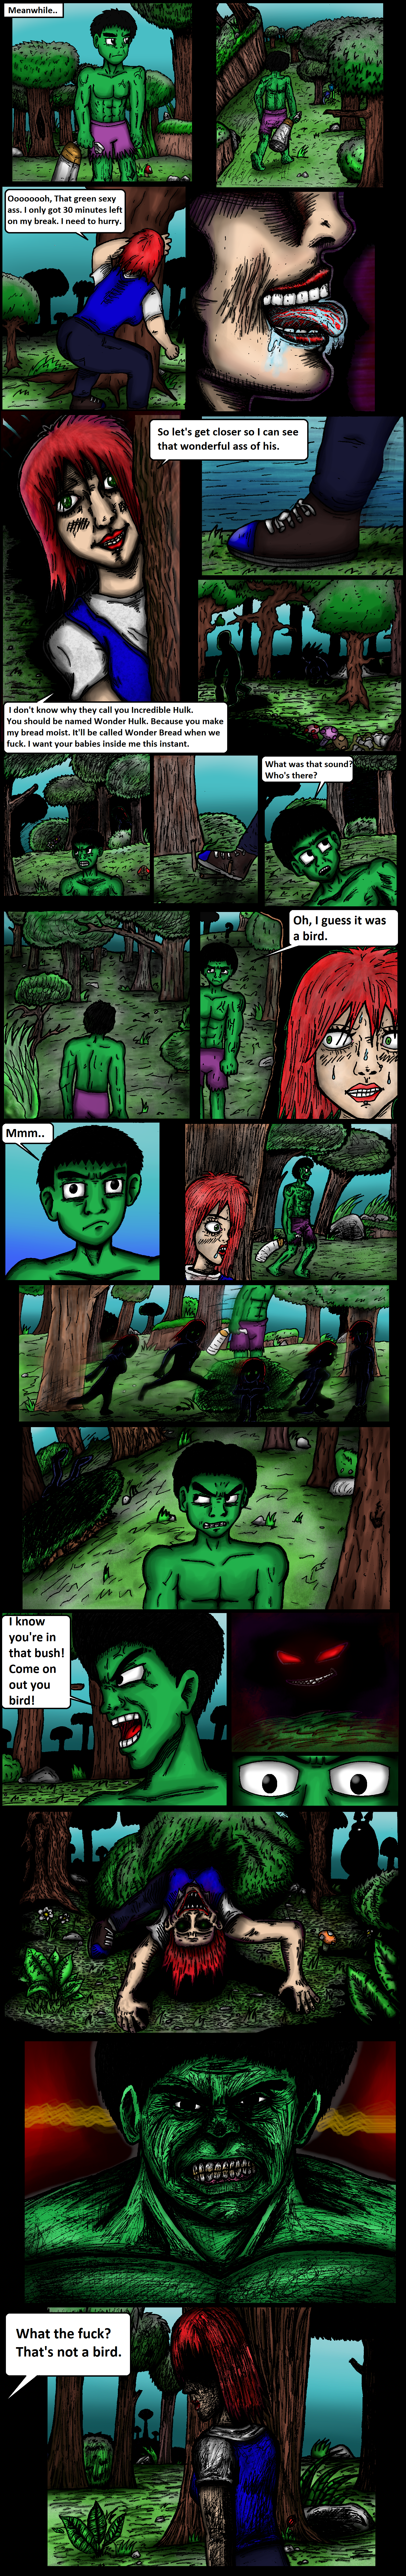 ch26/pg16.png. If you're seeing this, enable images. Or, perhaps we have a website issue. Try refreshing, if unsuccessful email commodorian@tailsgetstrolled.org with a detailed description of how you got here.